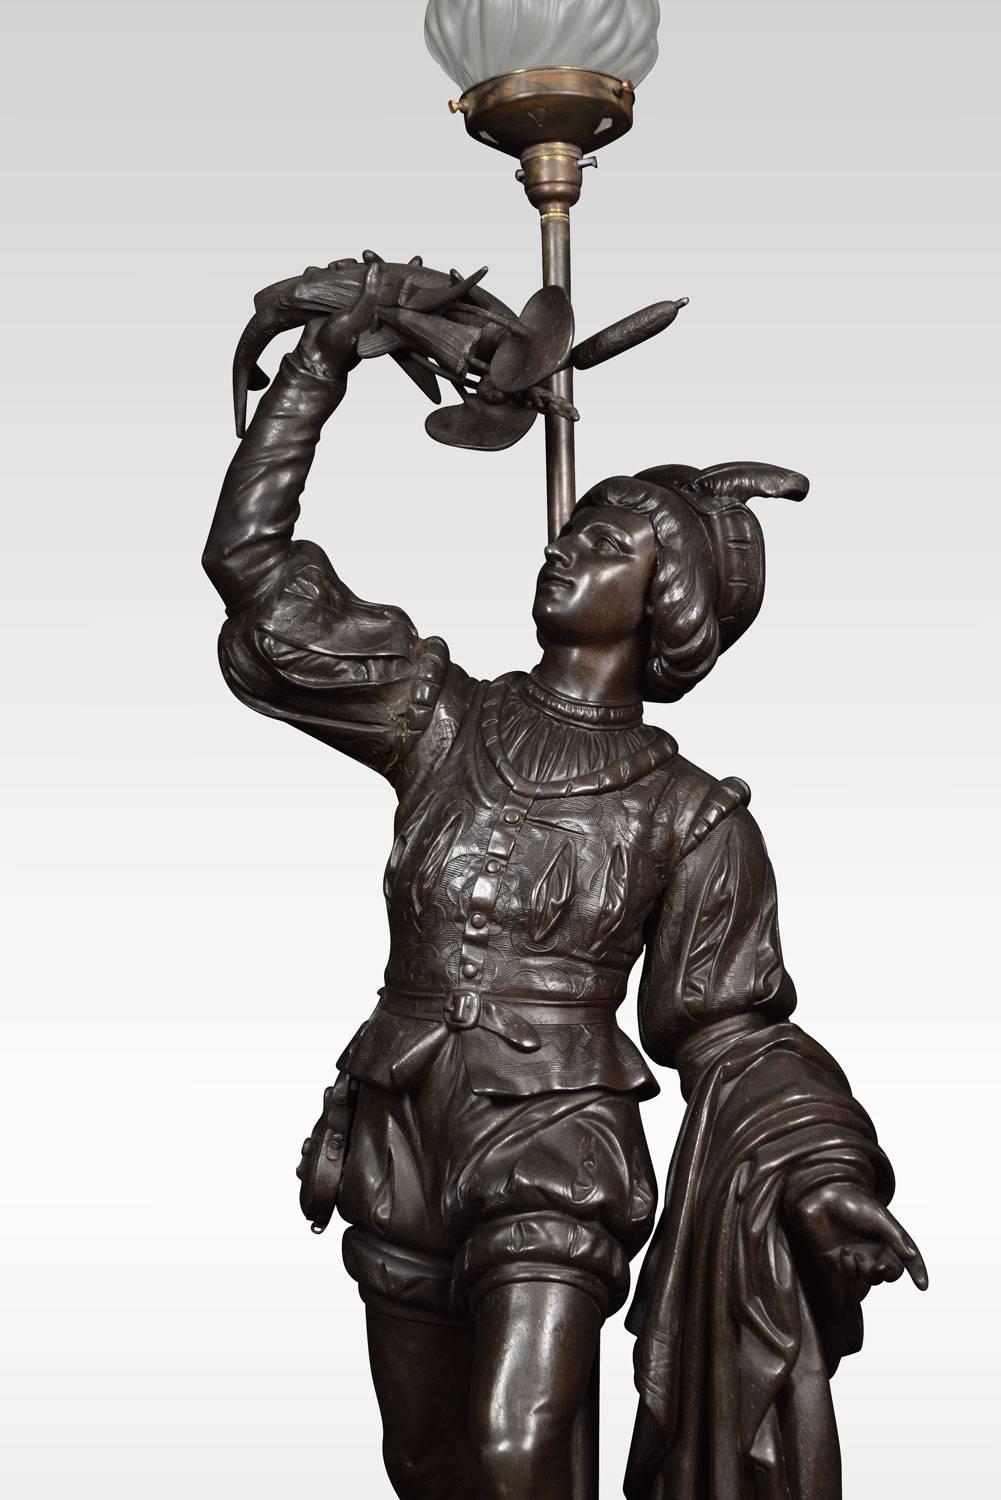 19th century spelter figure with fine detailed casting, in traditional dress, depicting a fisherman with raised arm, standing on circular base with his catch at his feet.
Dimensions
Height 43 inches
Width 14 inches
Depth 11.5 inches.